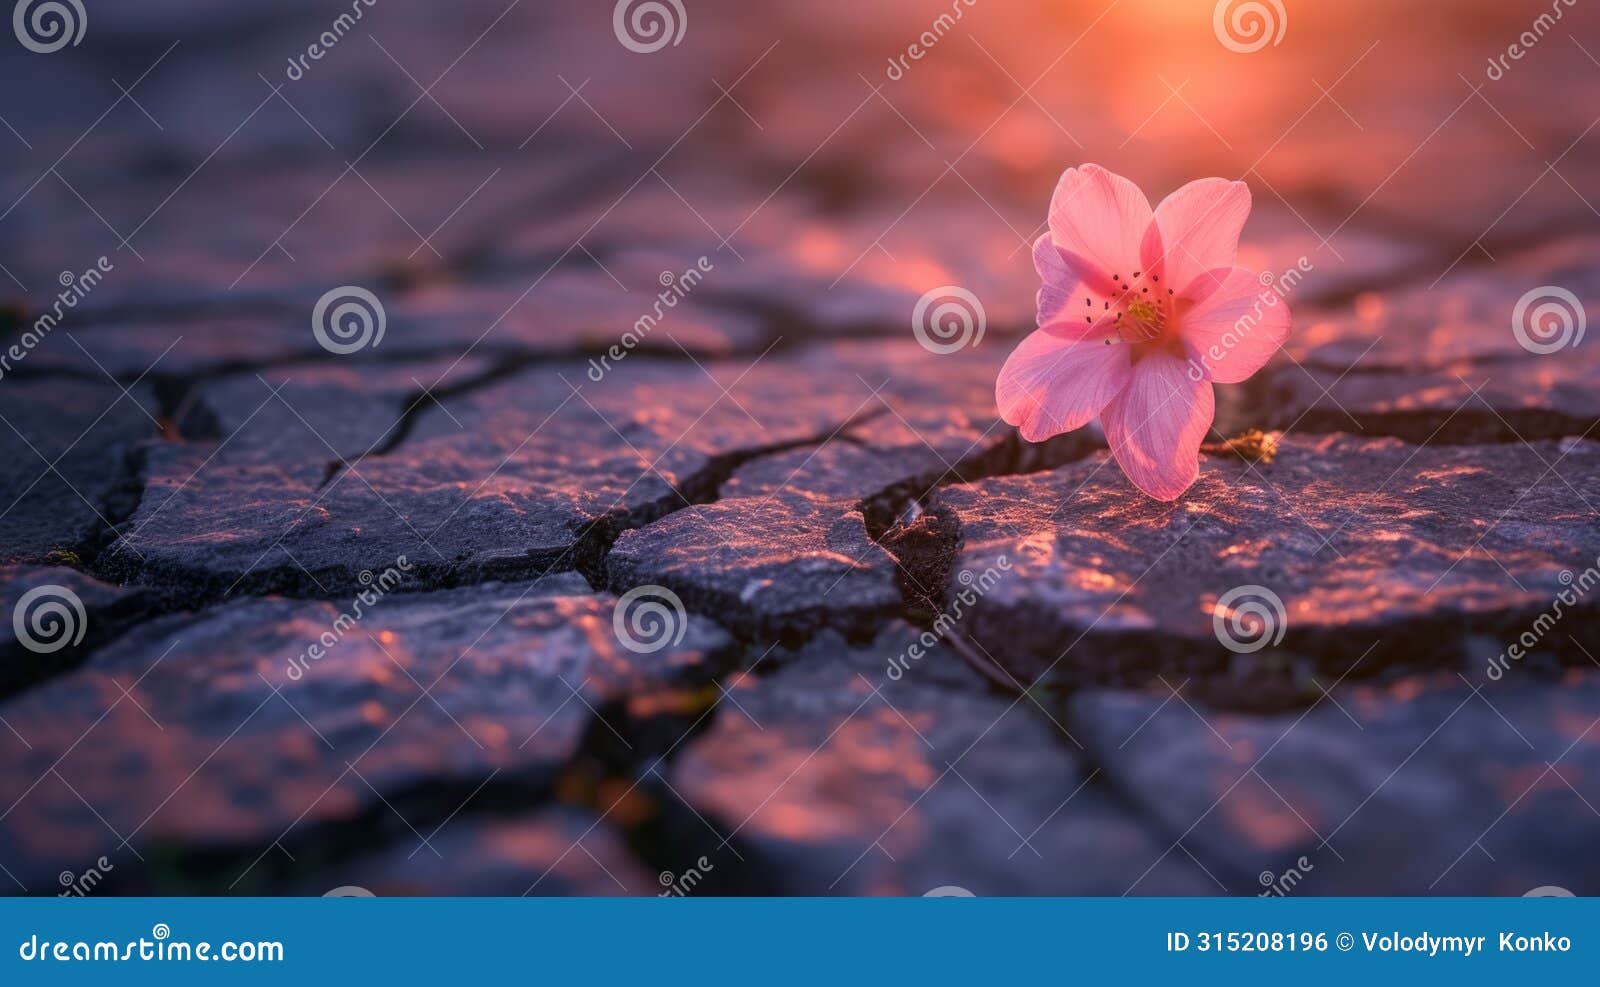 pink flower on cracked road, vibrant beauty amidst deterioration